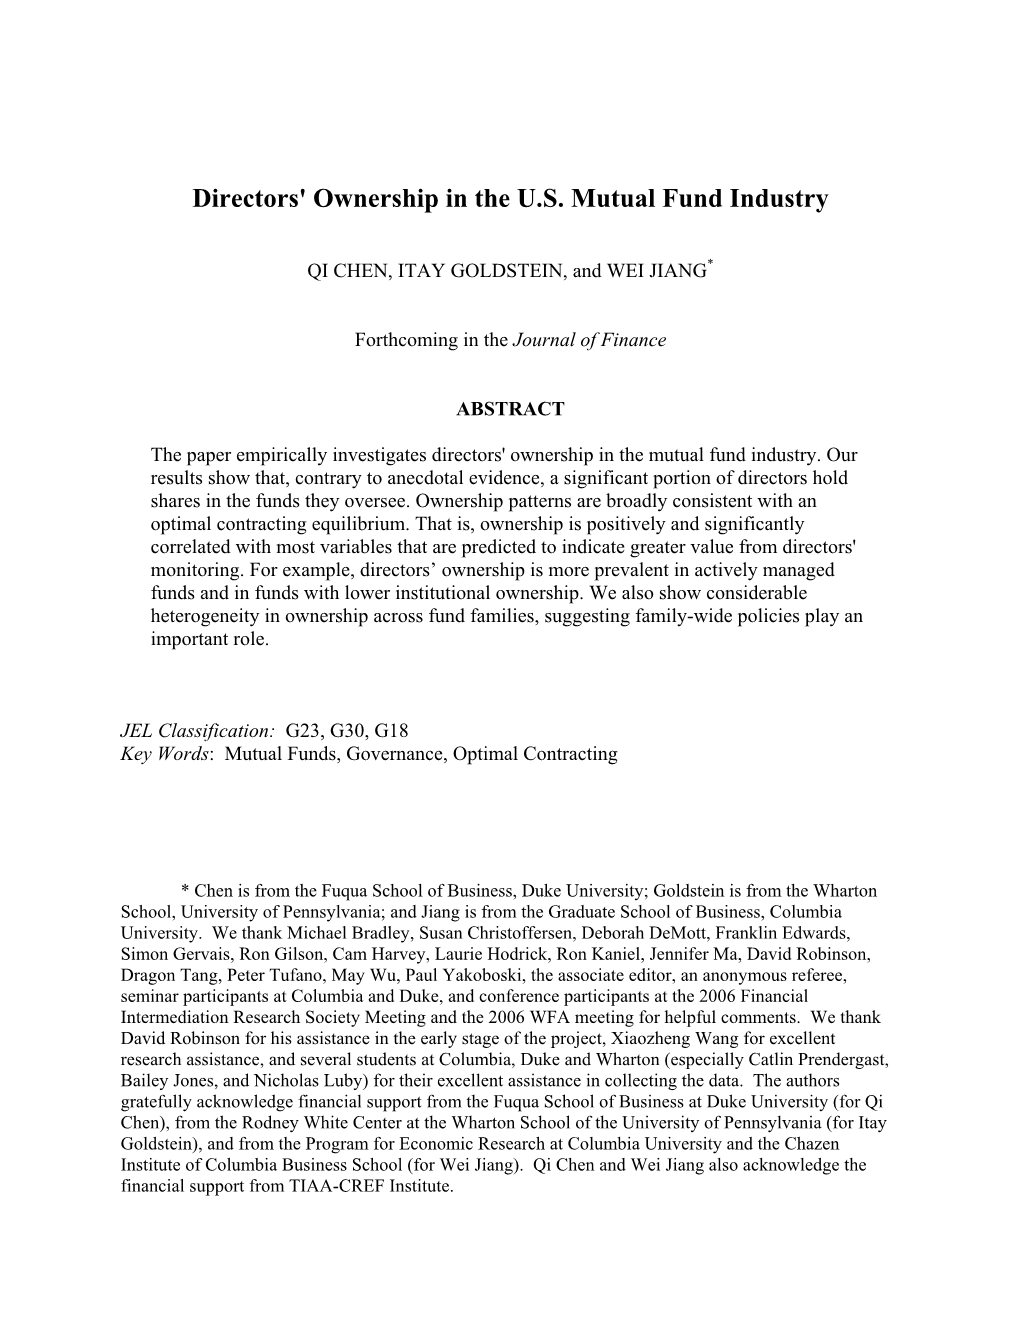 Directors' Ownership in the U.S. Mutual Fund Industry